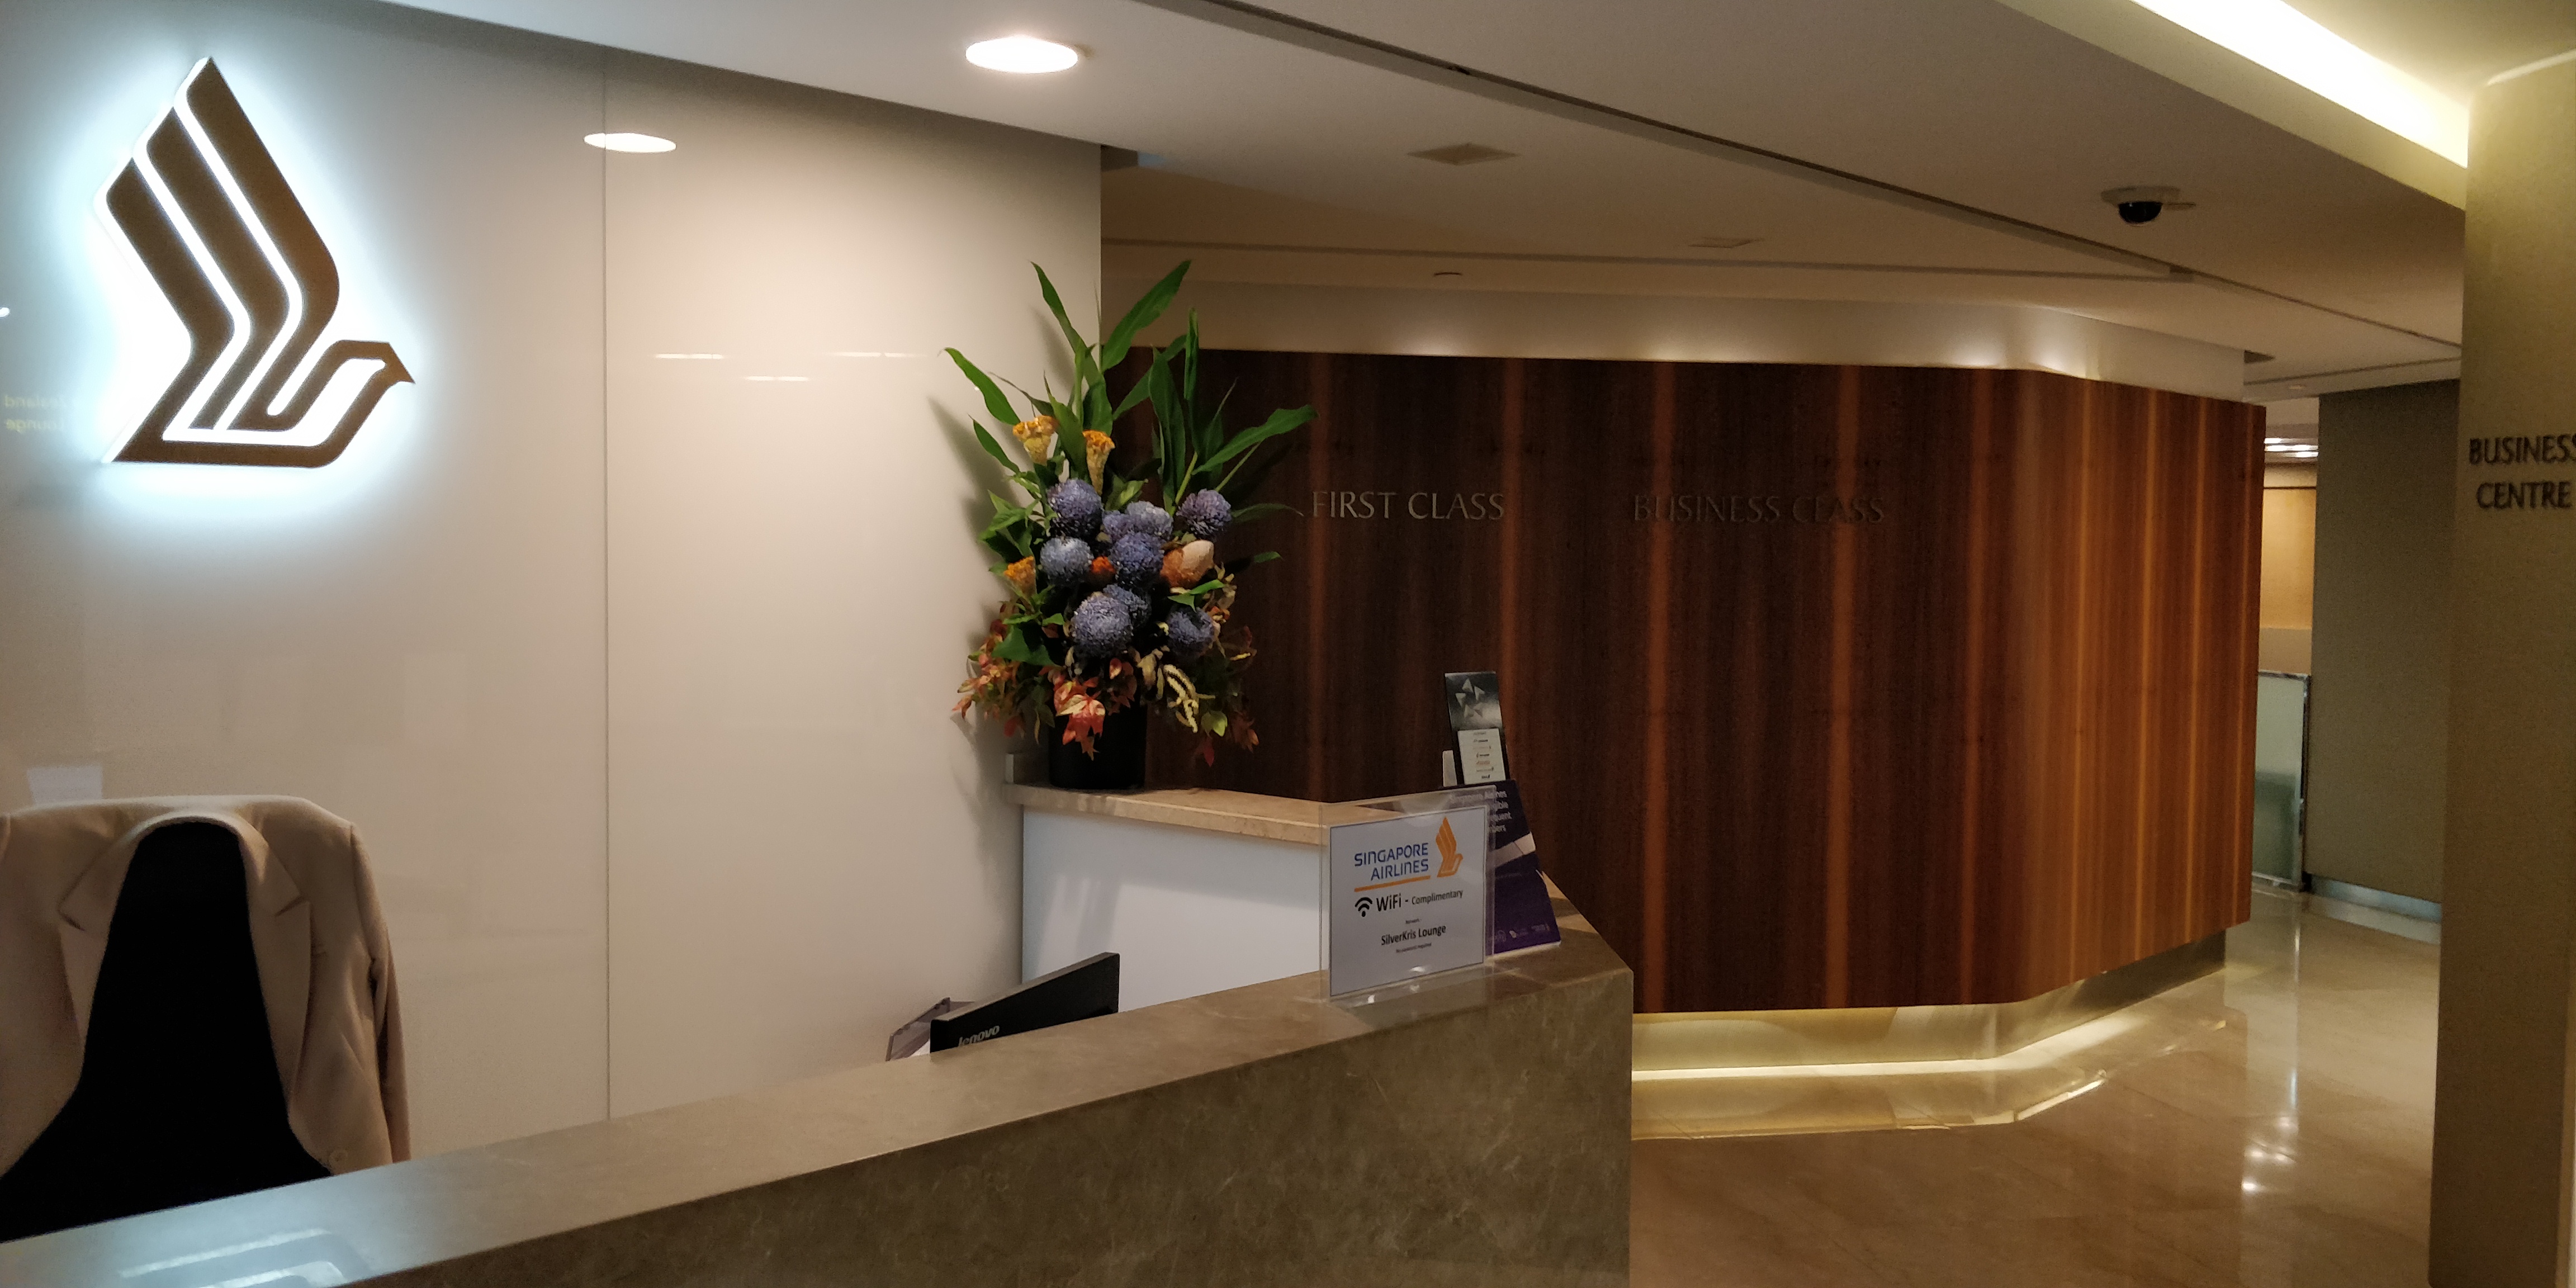  A PICTURE OF THE SILVERKRIS LOUNGE MEL ENTRANCE